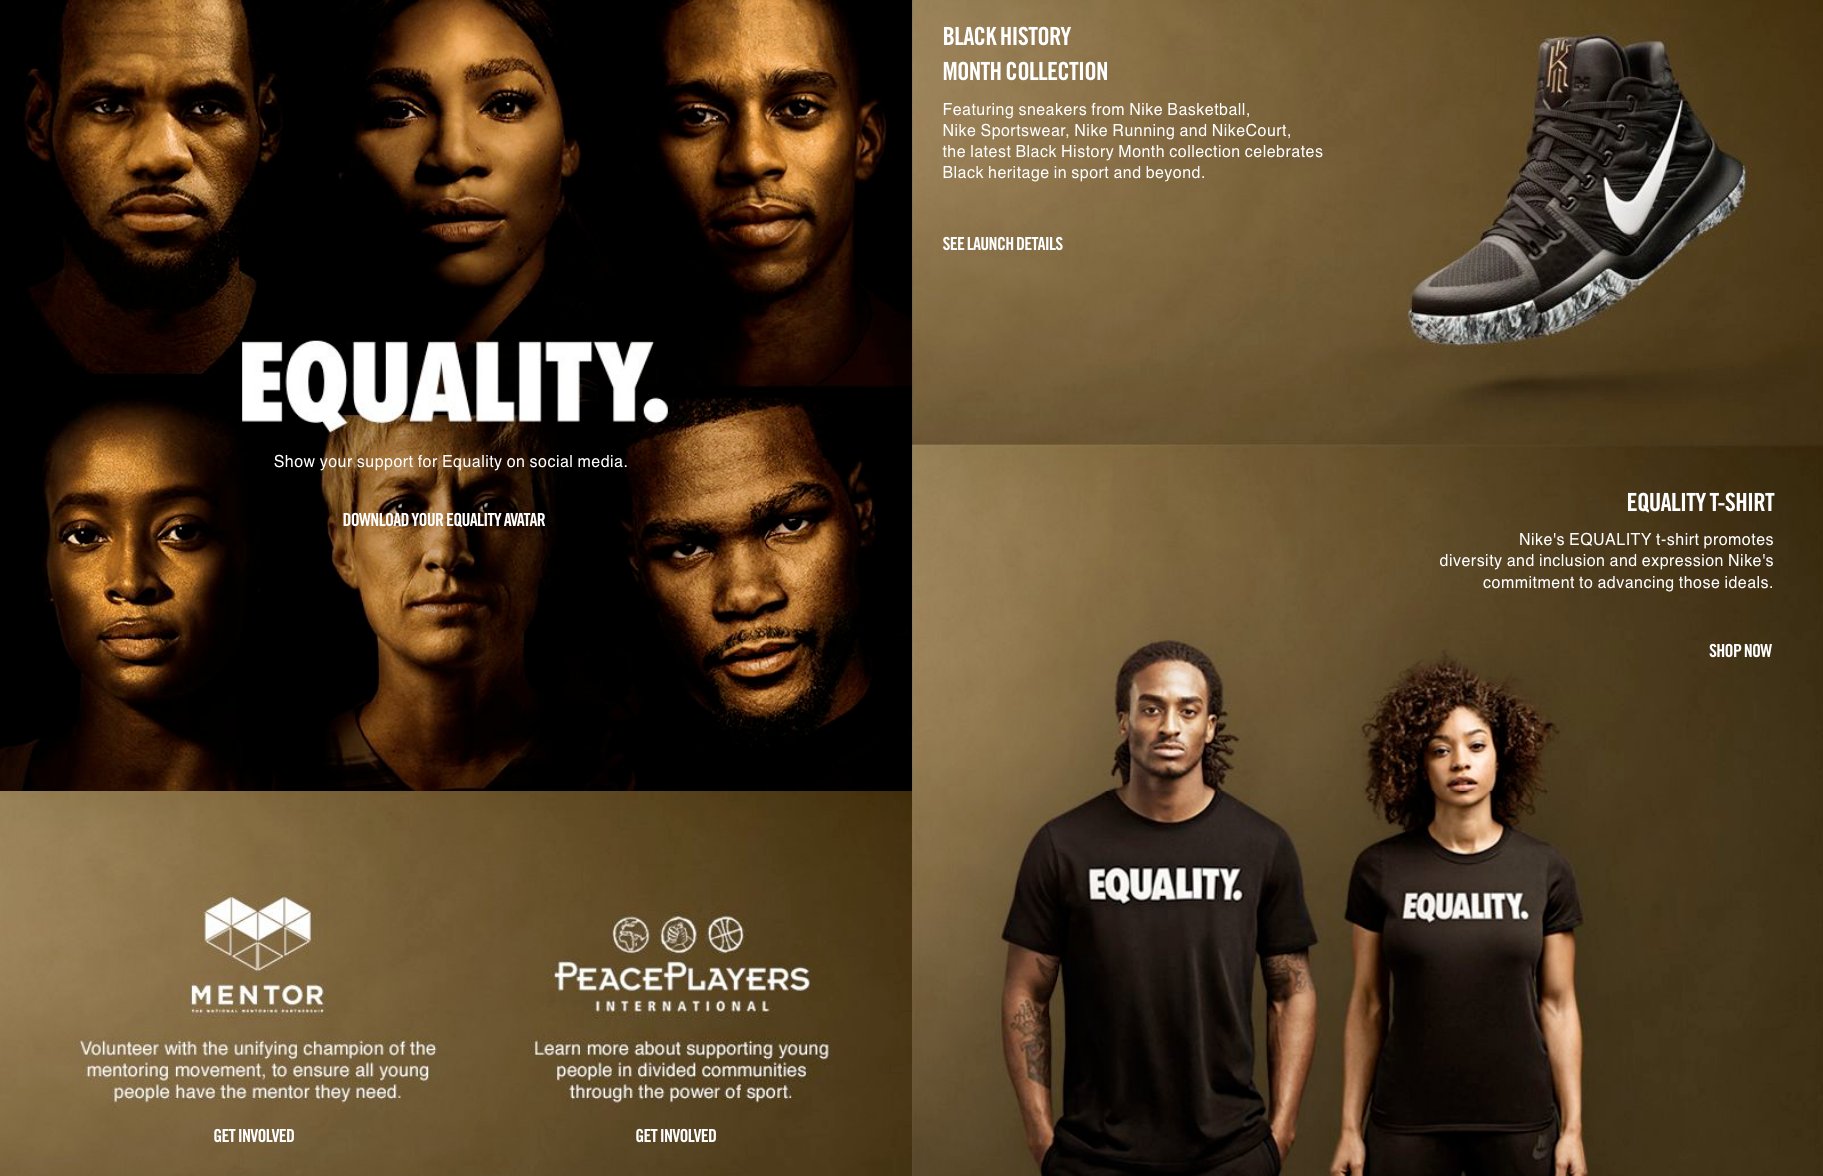 Principiante Insignia auxiliar KicksFinder on Twitter: "Nike celebrates Equality with a new campaign and a  new collection including the Equality tee. https://t.co/V3GJA4rXL0  https://t.co/QtqmdMWuQ1" / Twitter